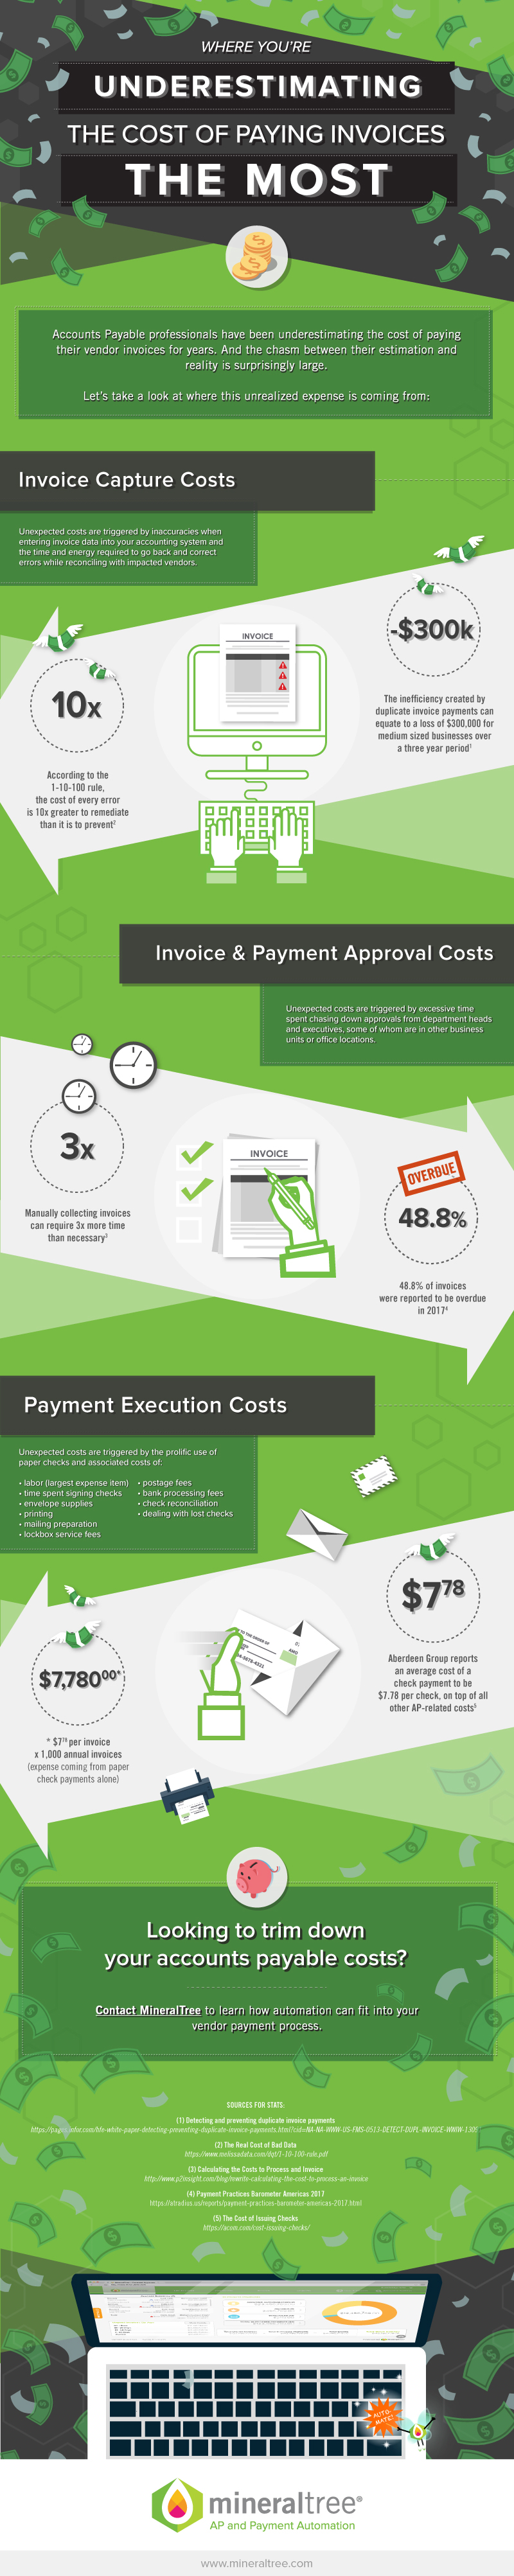 Where You're Underestimating the COst of Paying Invoices the Most